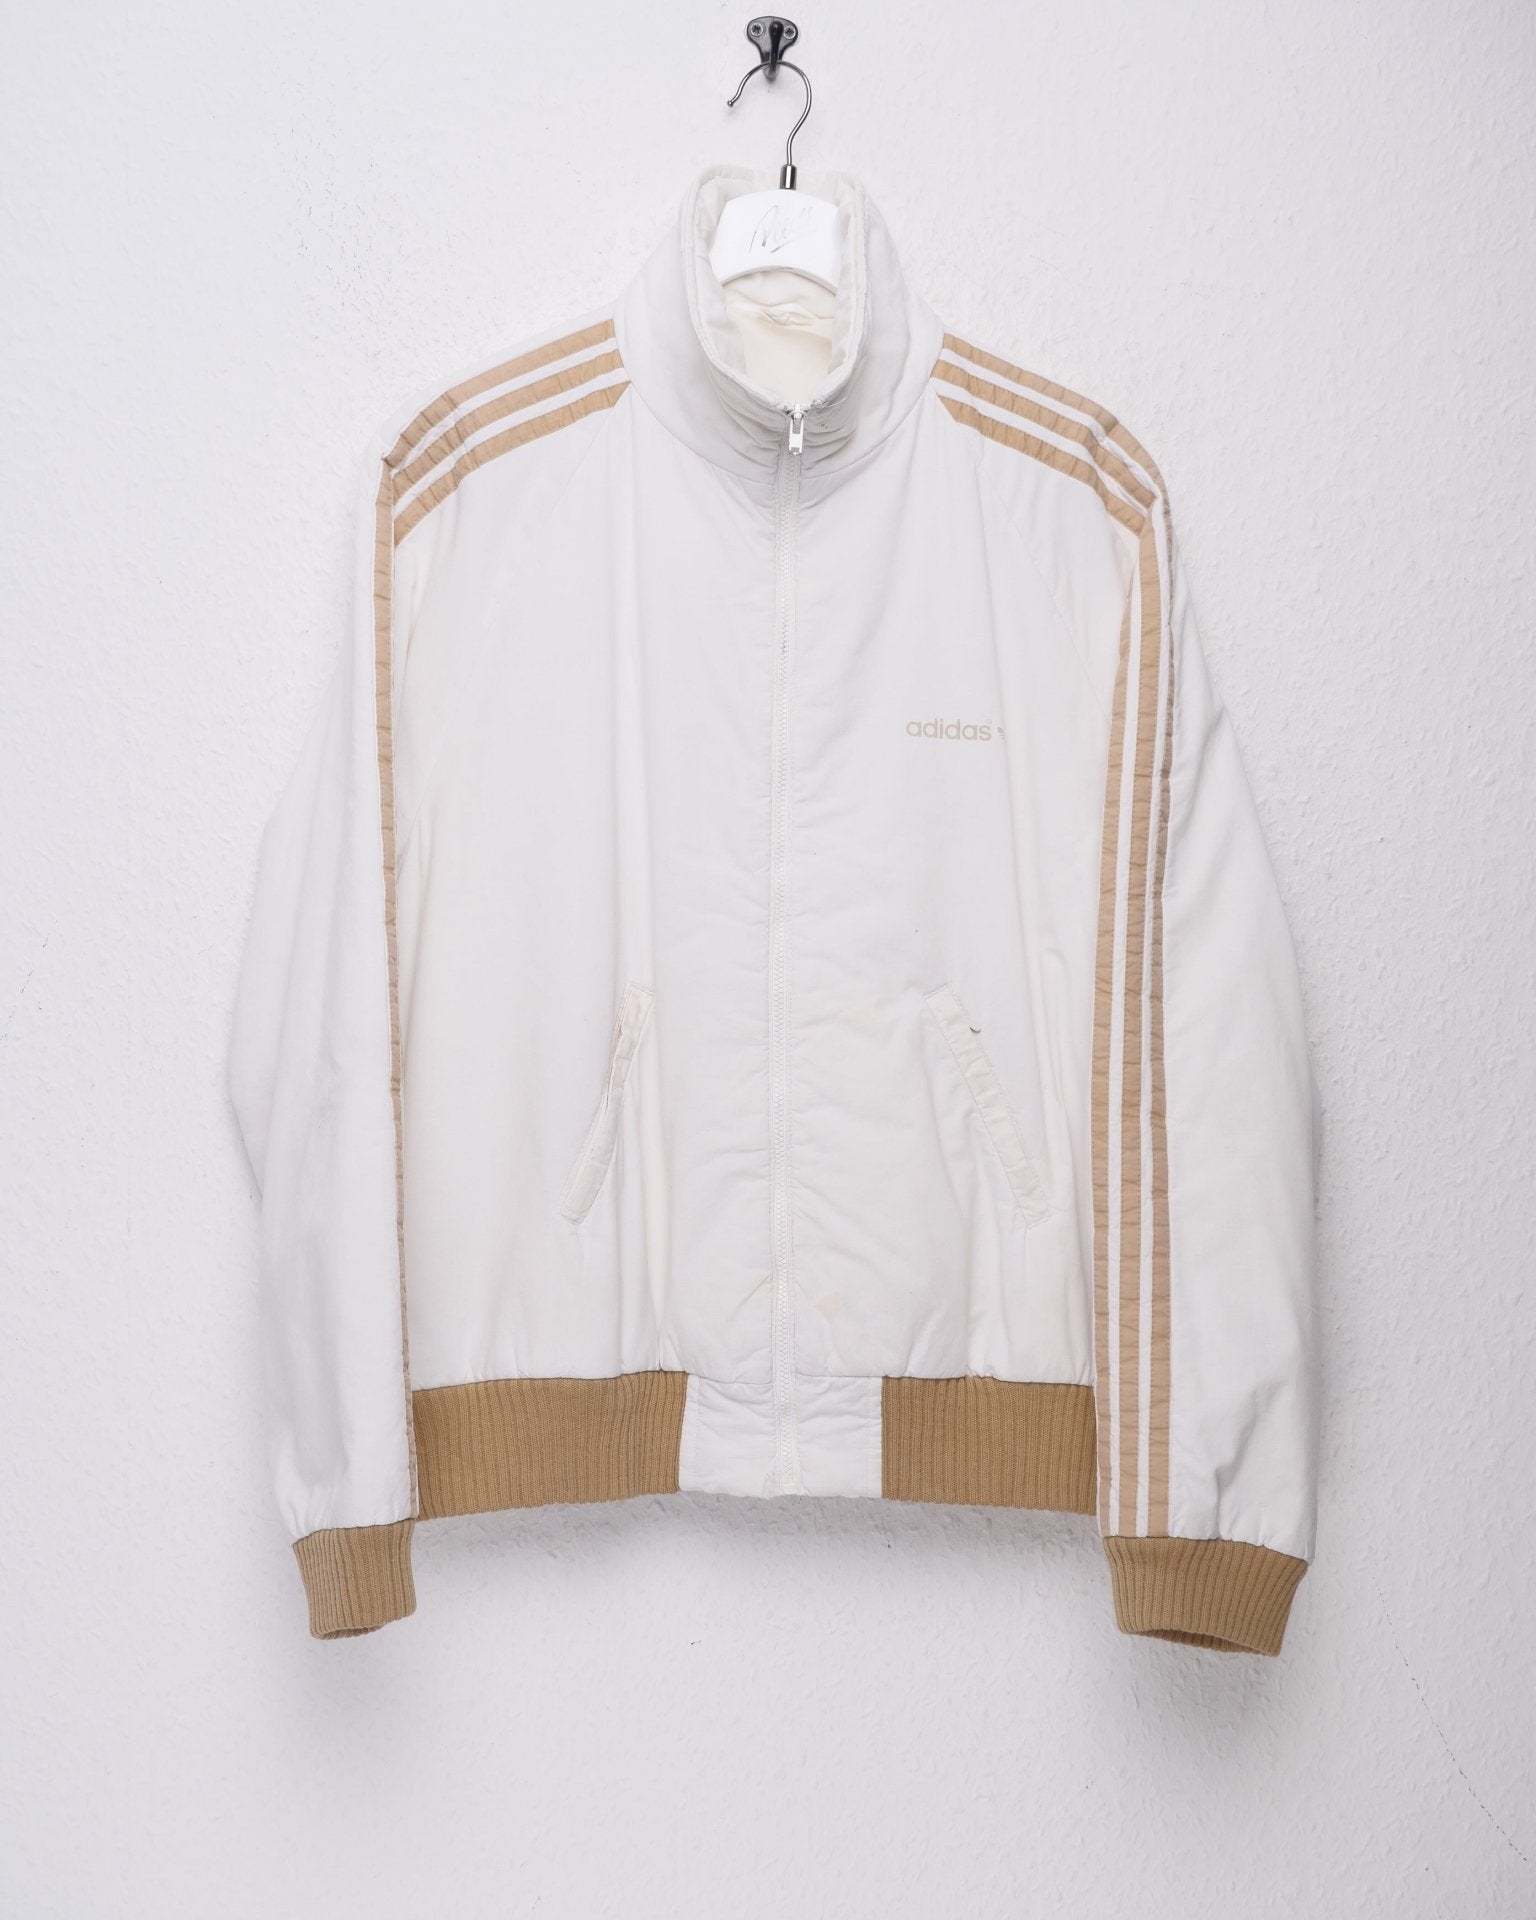 Adidas printed Spellout two toned Jacket - Peeces